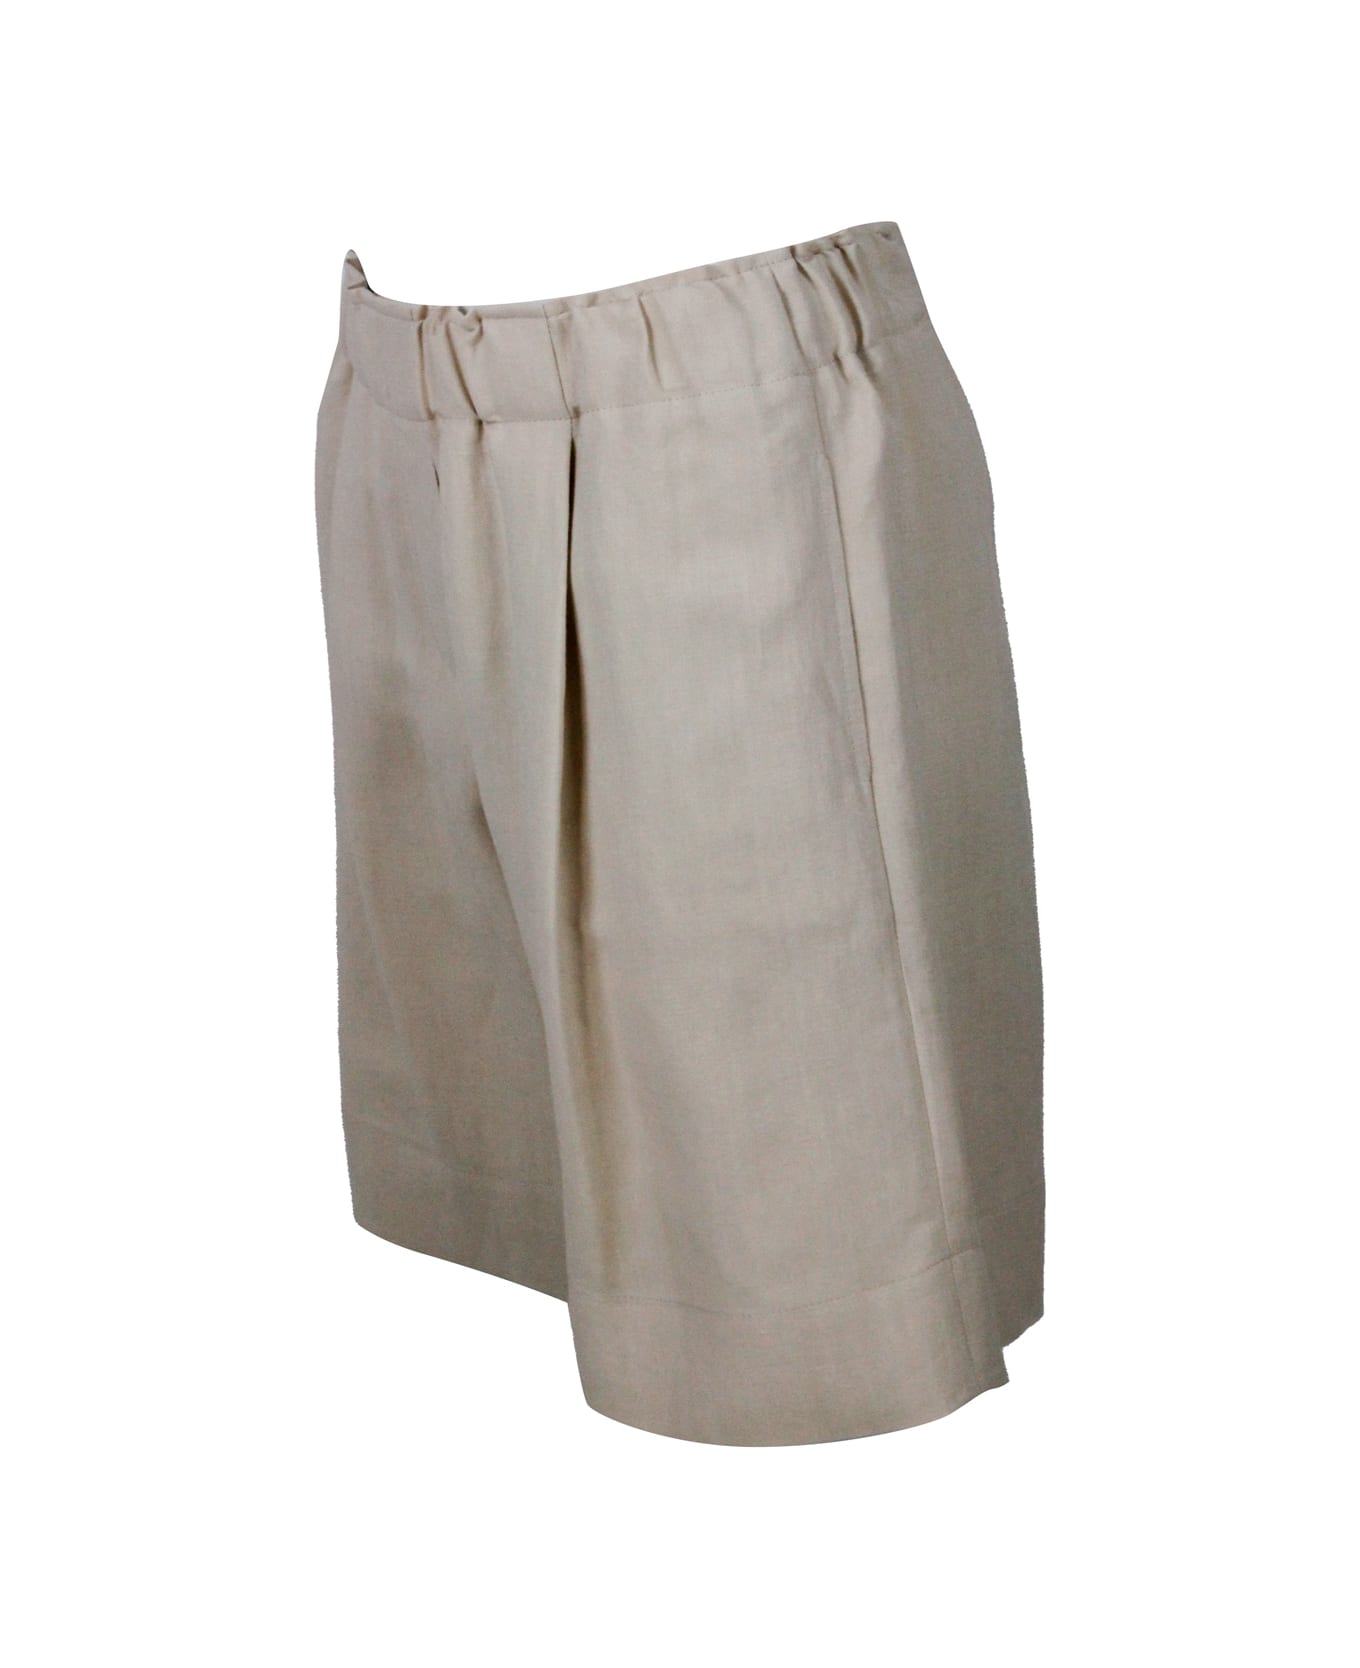 Antonelli Knee-length Bermuda Shorts In Linen Blend With Small Darts And Elasticated Waist